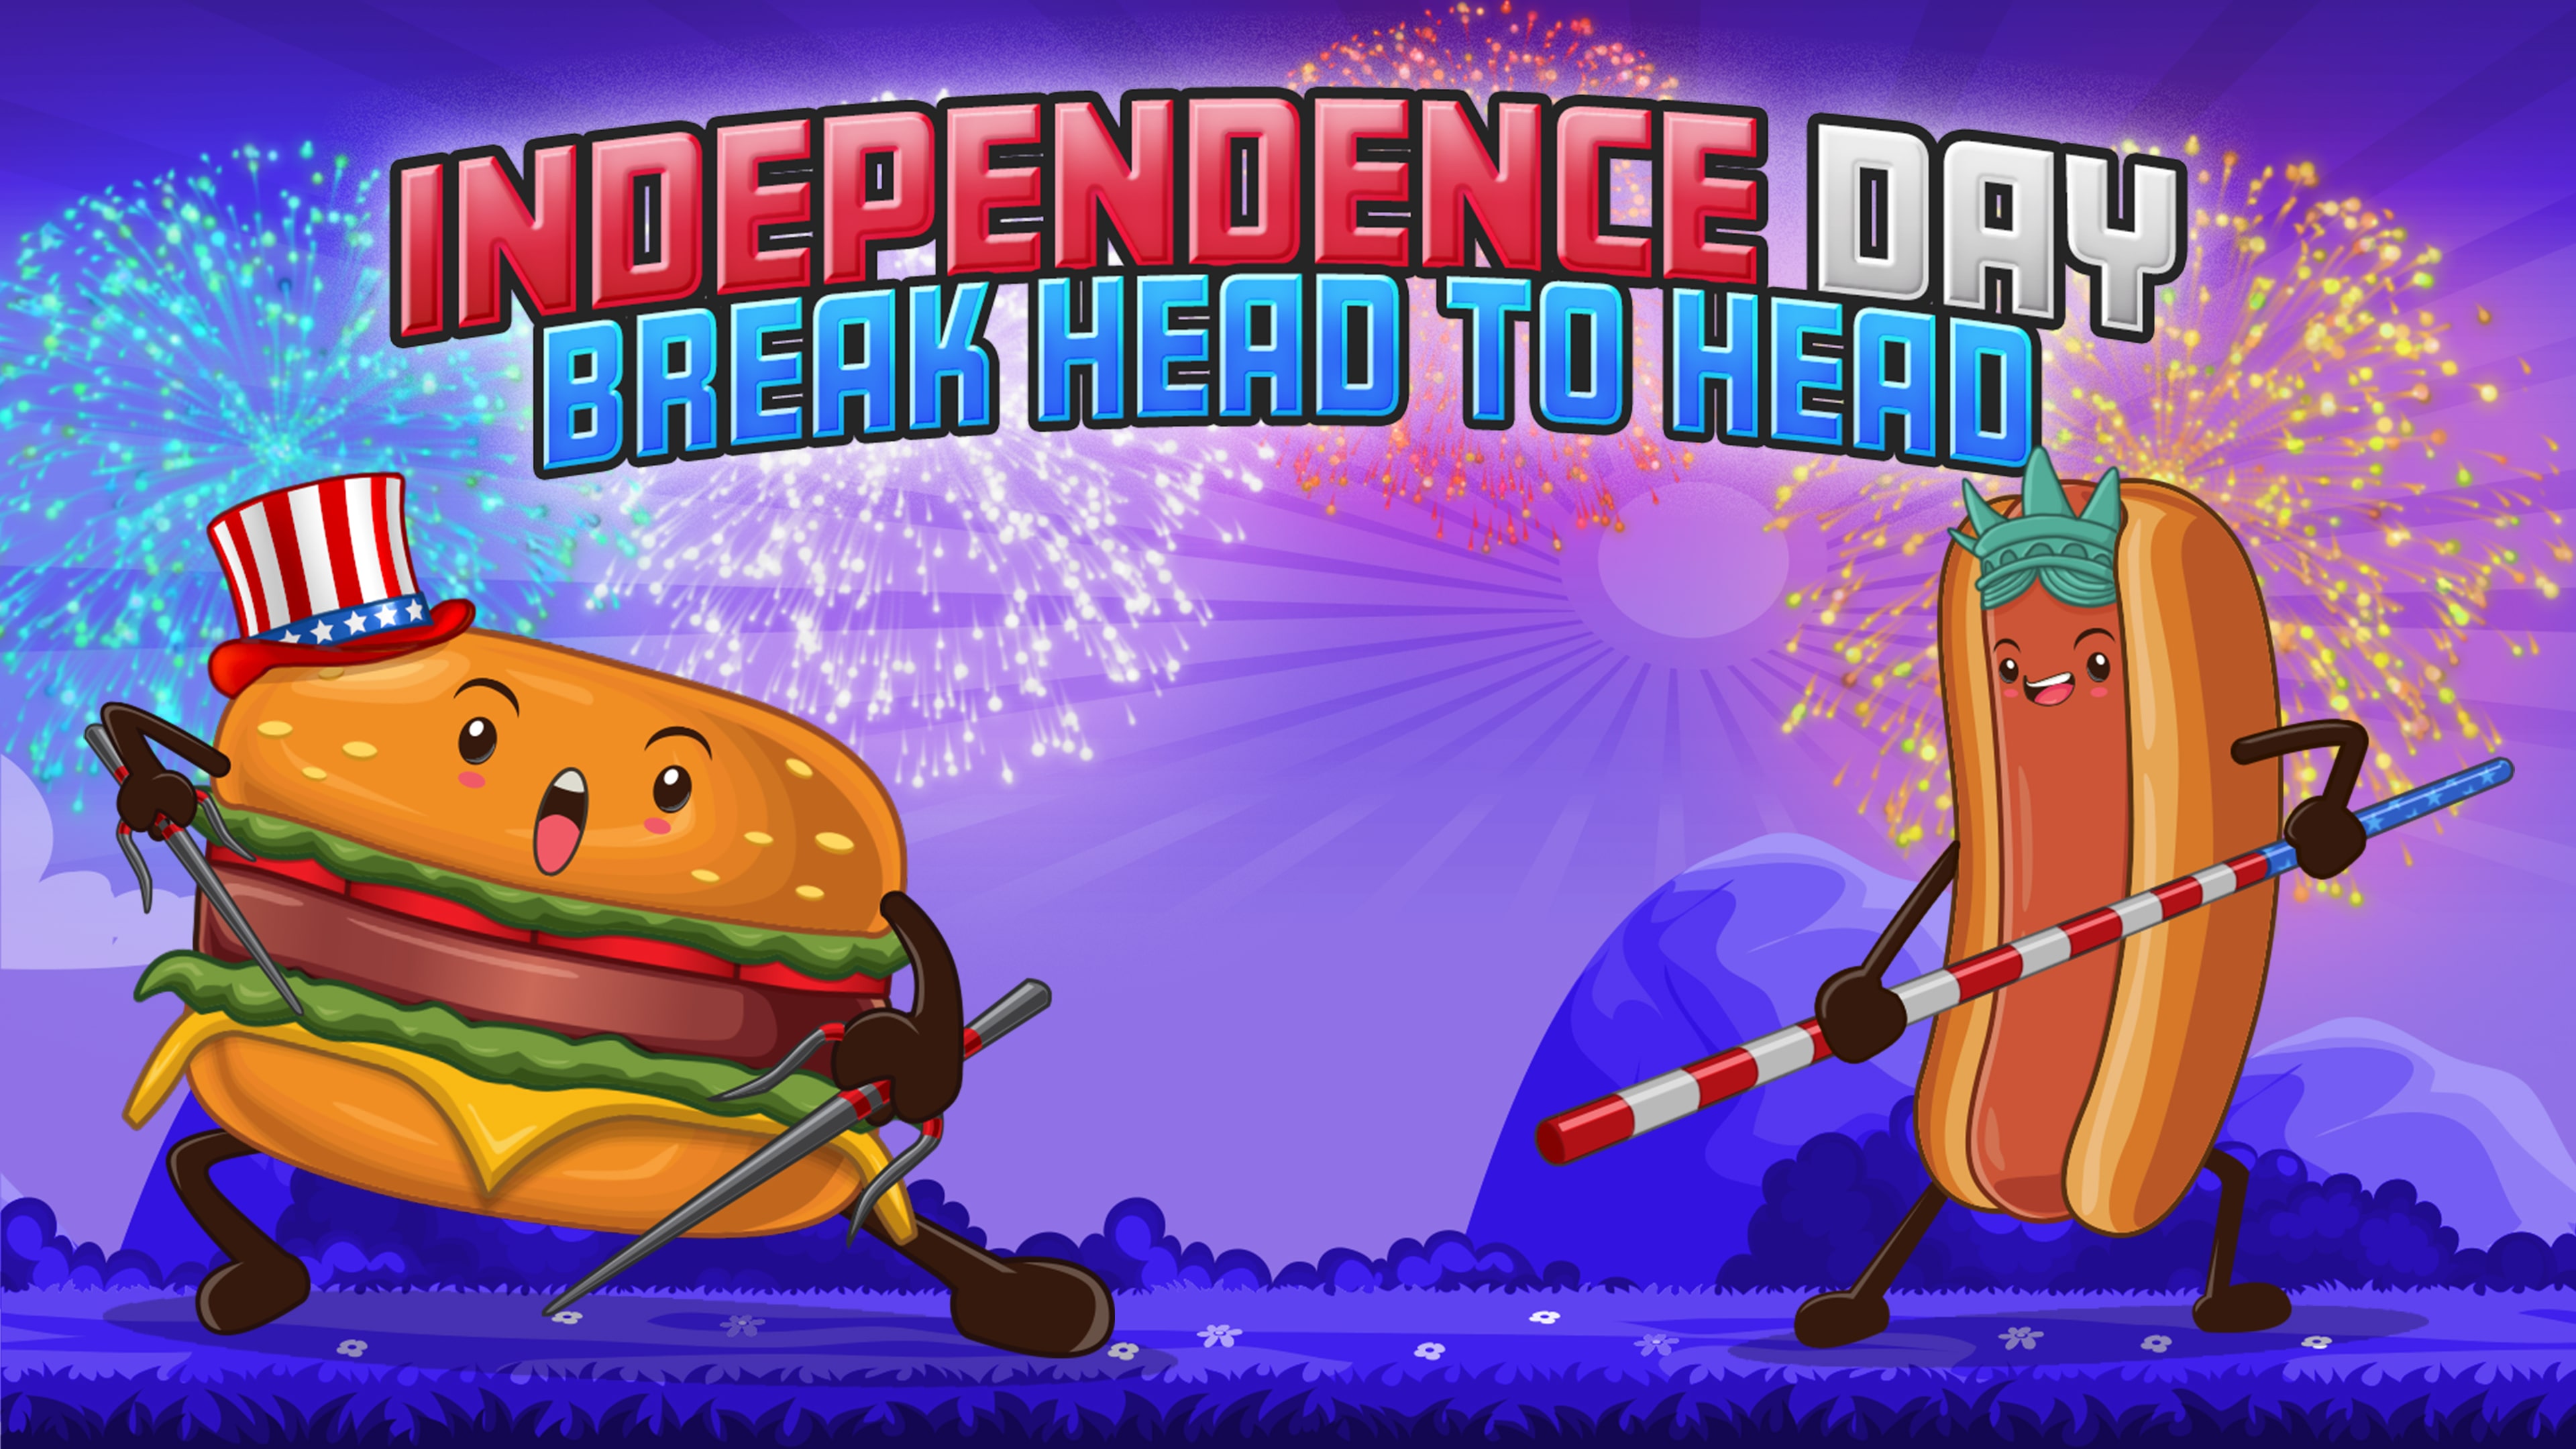 Independence Day Break Head to Head - Avatar Full Game Bundle